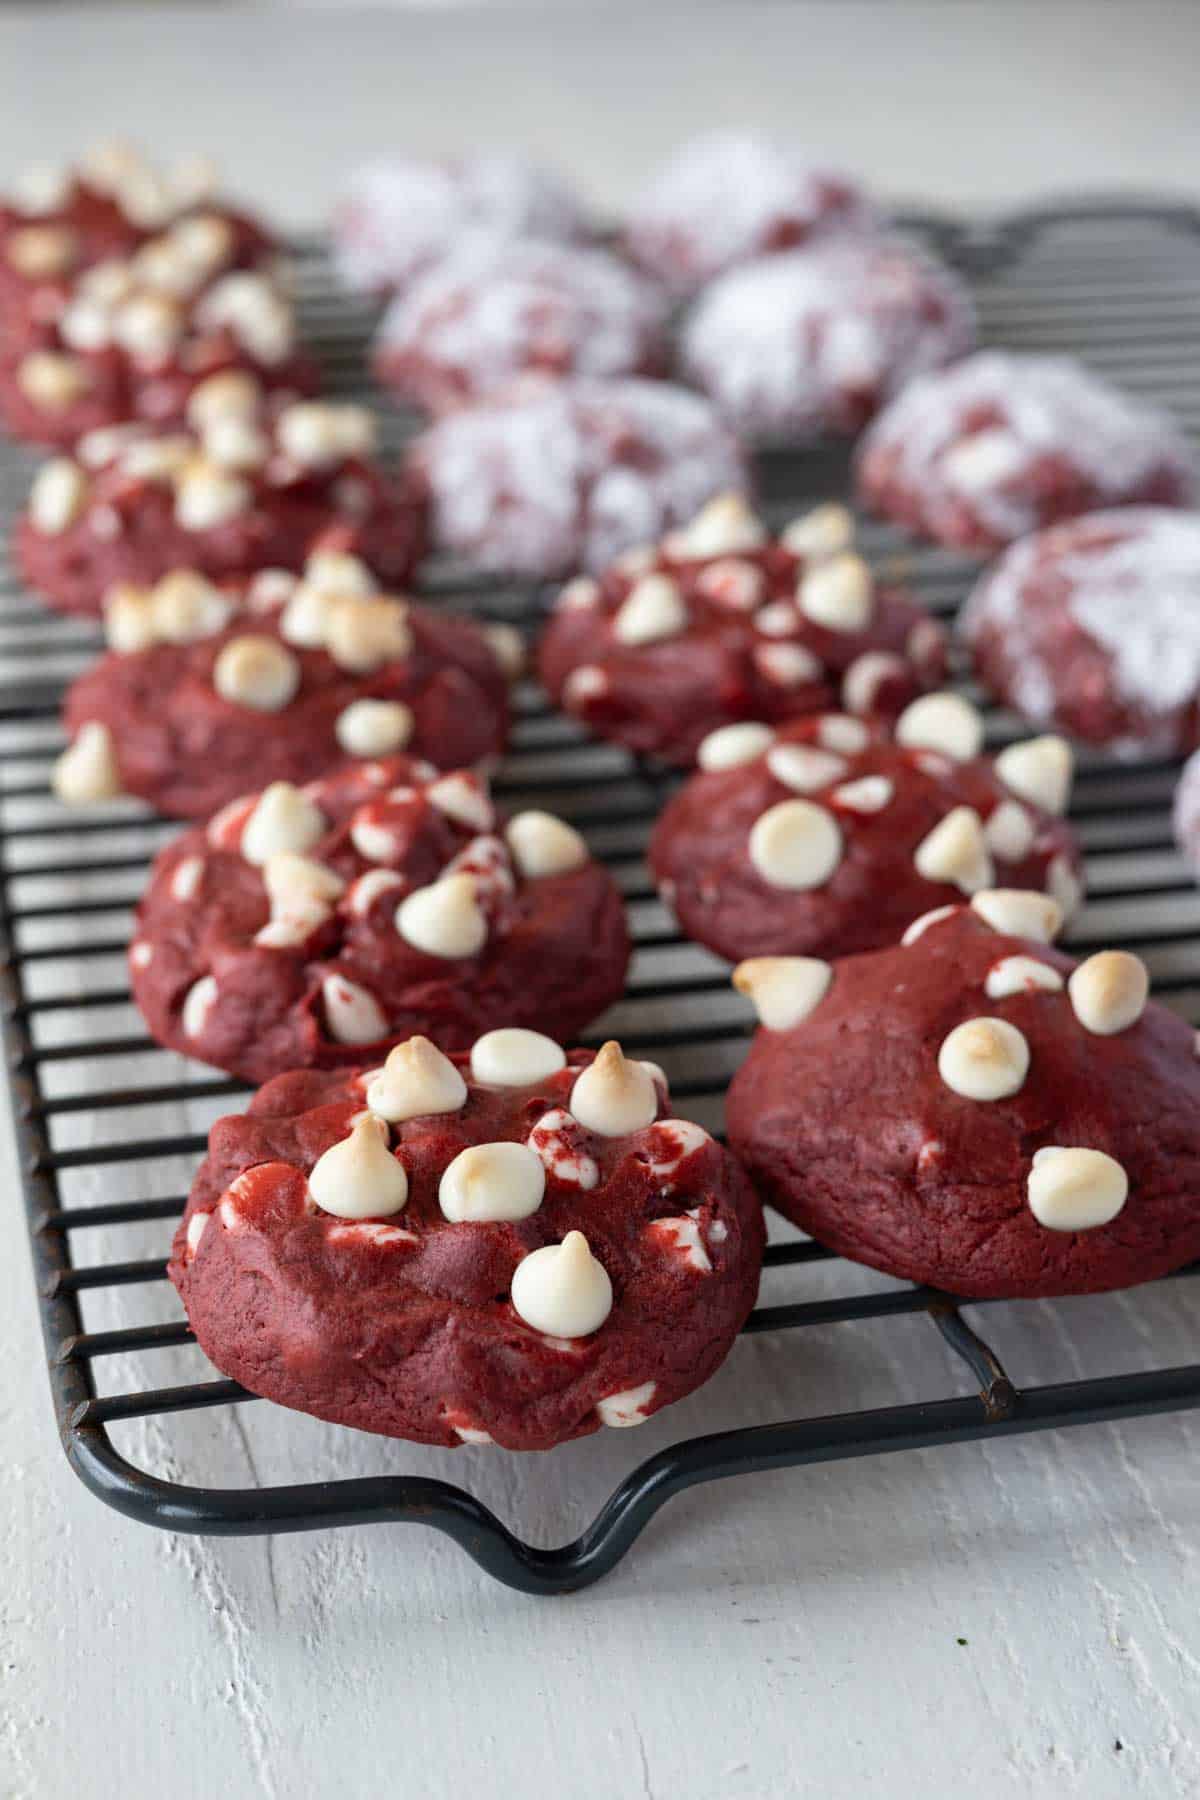 Baked red velvet cookies with white chocolate chips.